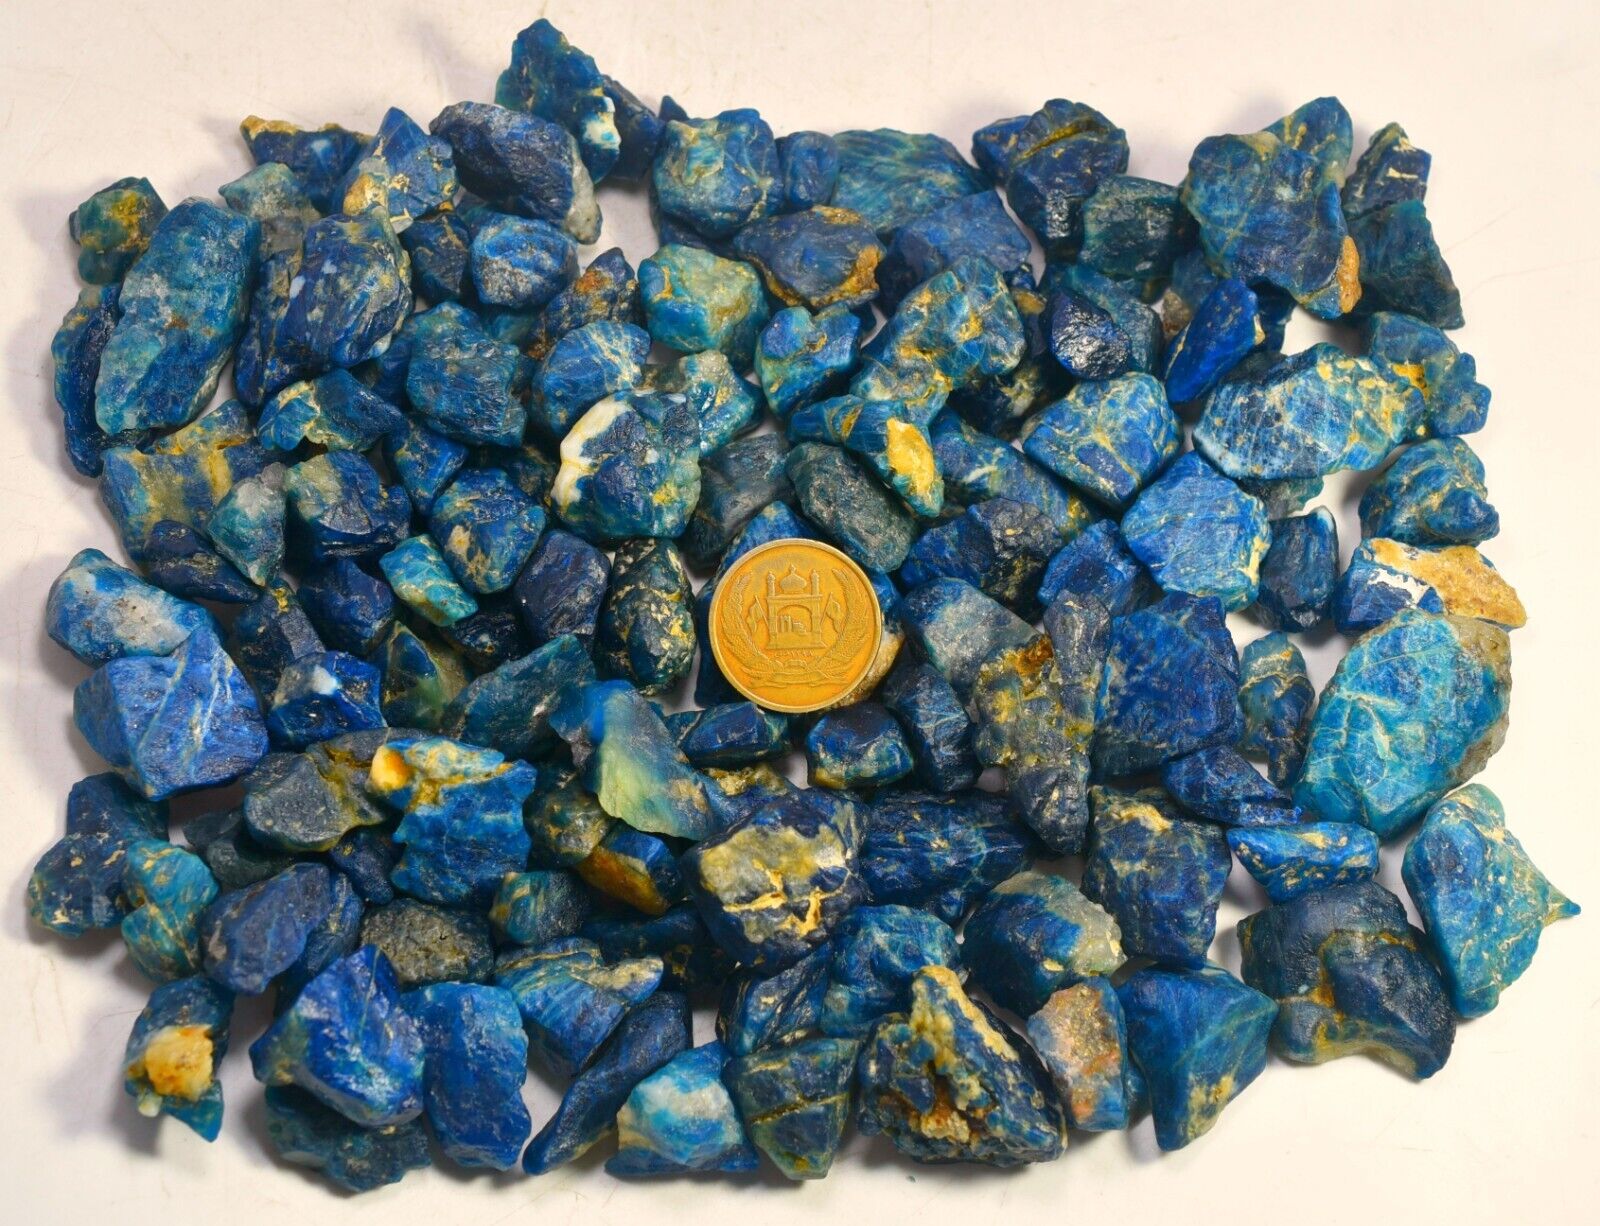 700 GM Beautiful Natural Cutting Grade Afghanite Crystals Lot From Afghanistan